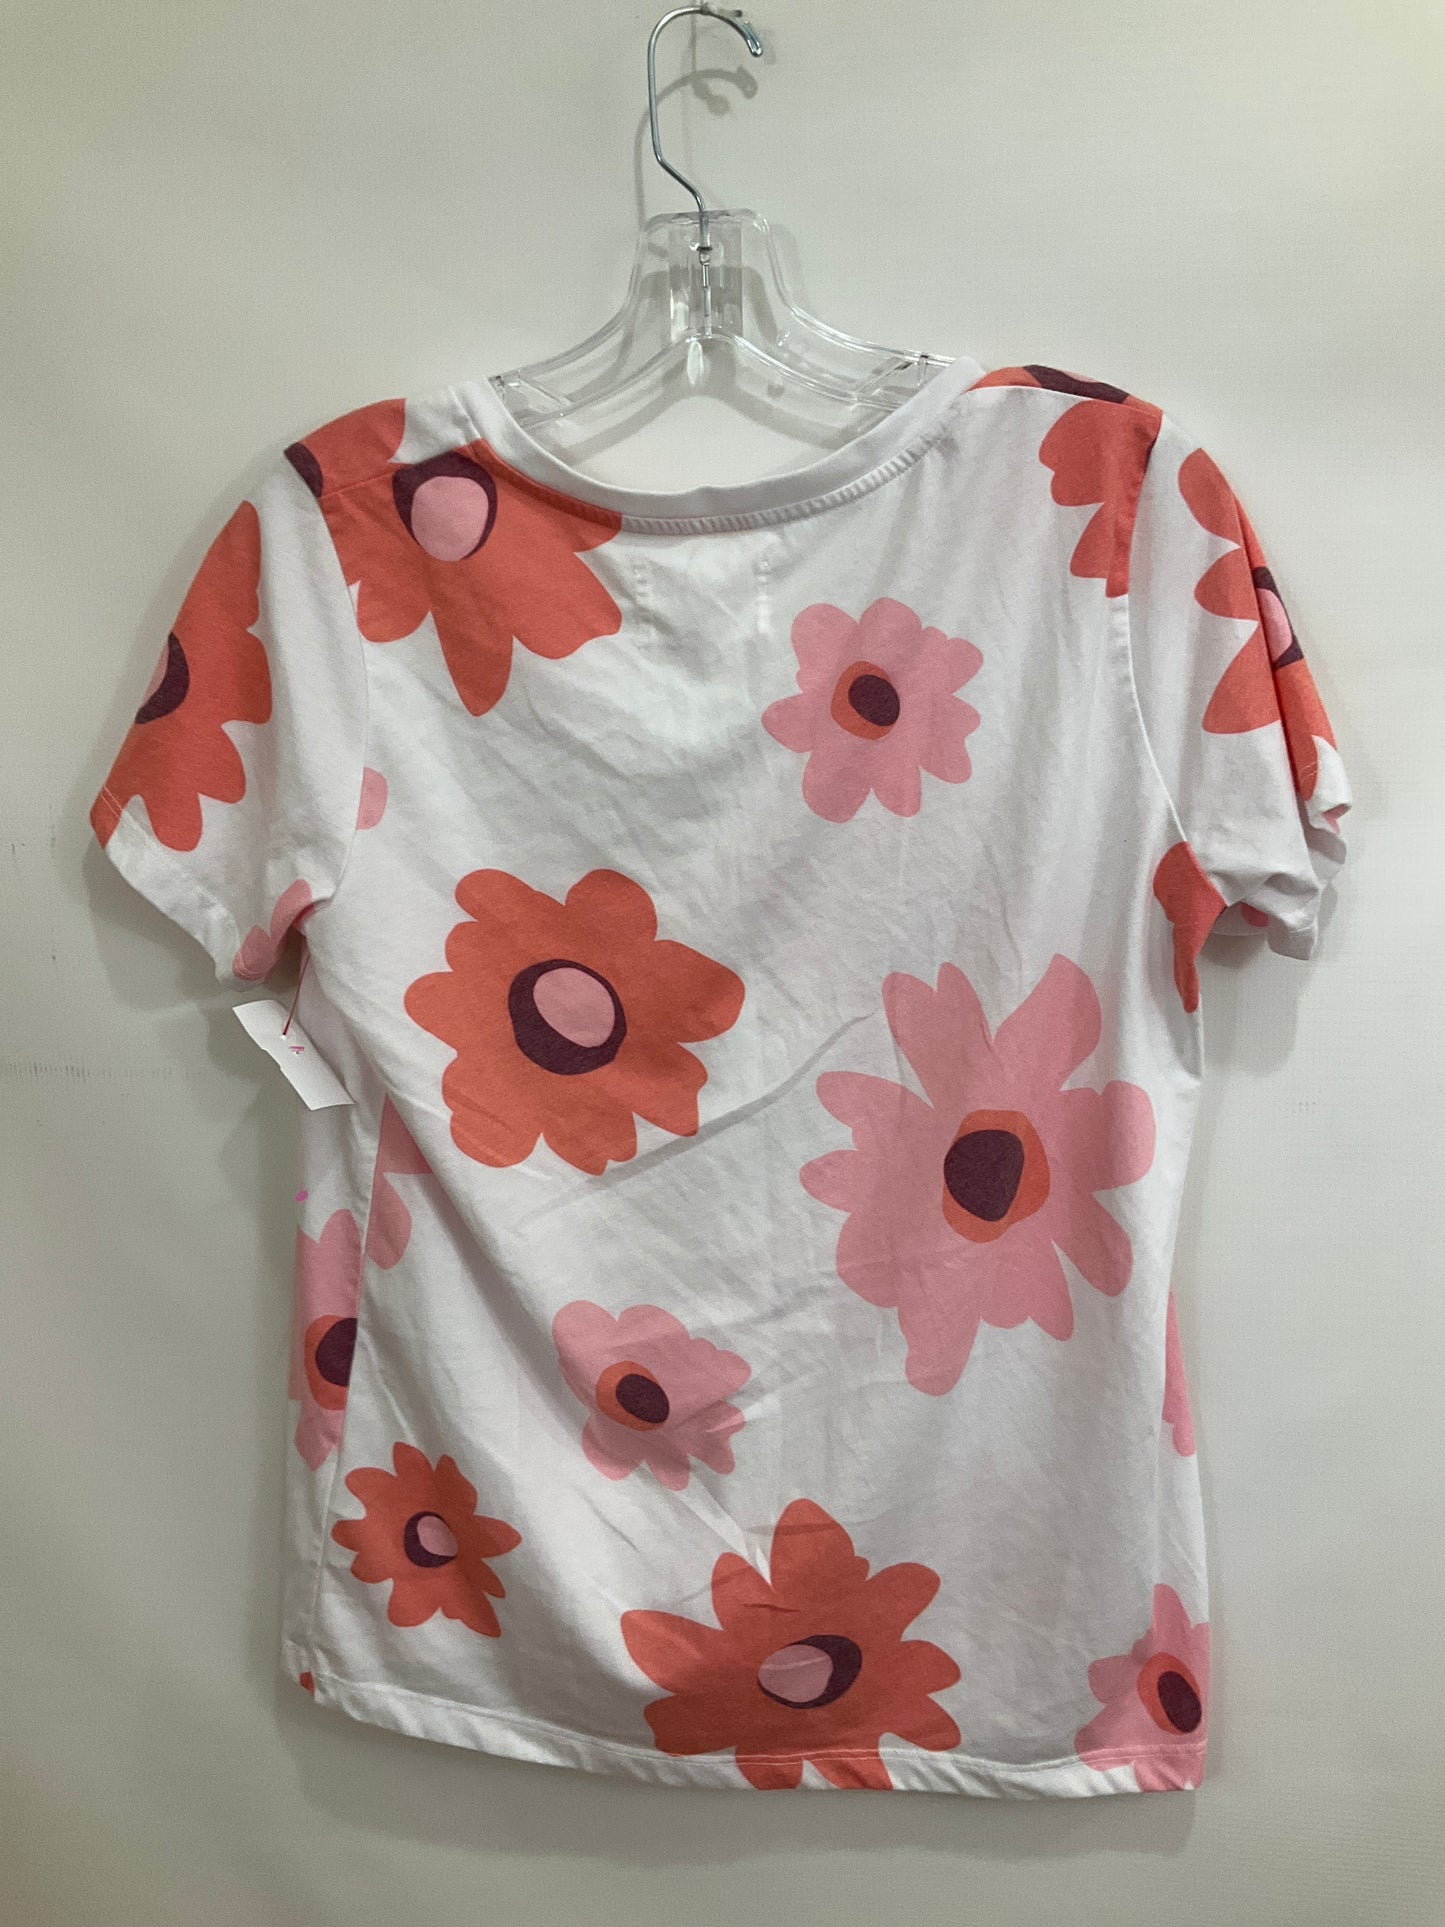 Top Short Sleeve Basic By Anthropologie  Size: M